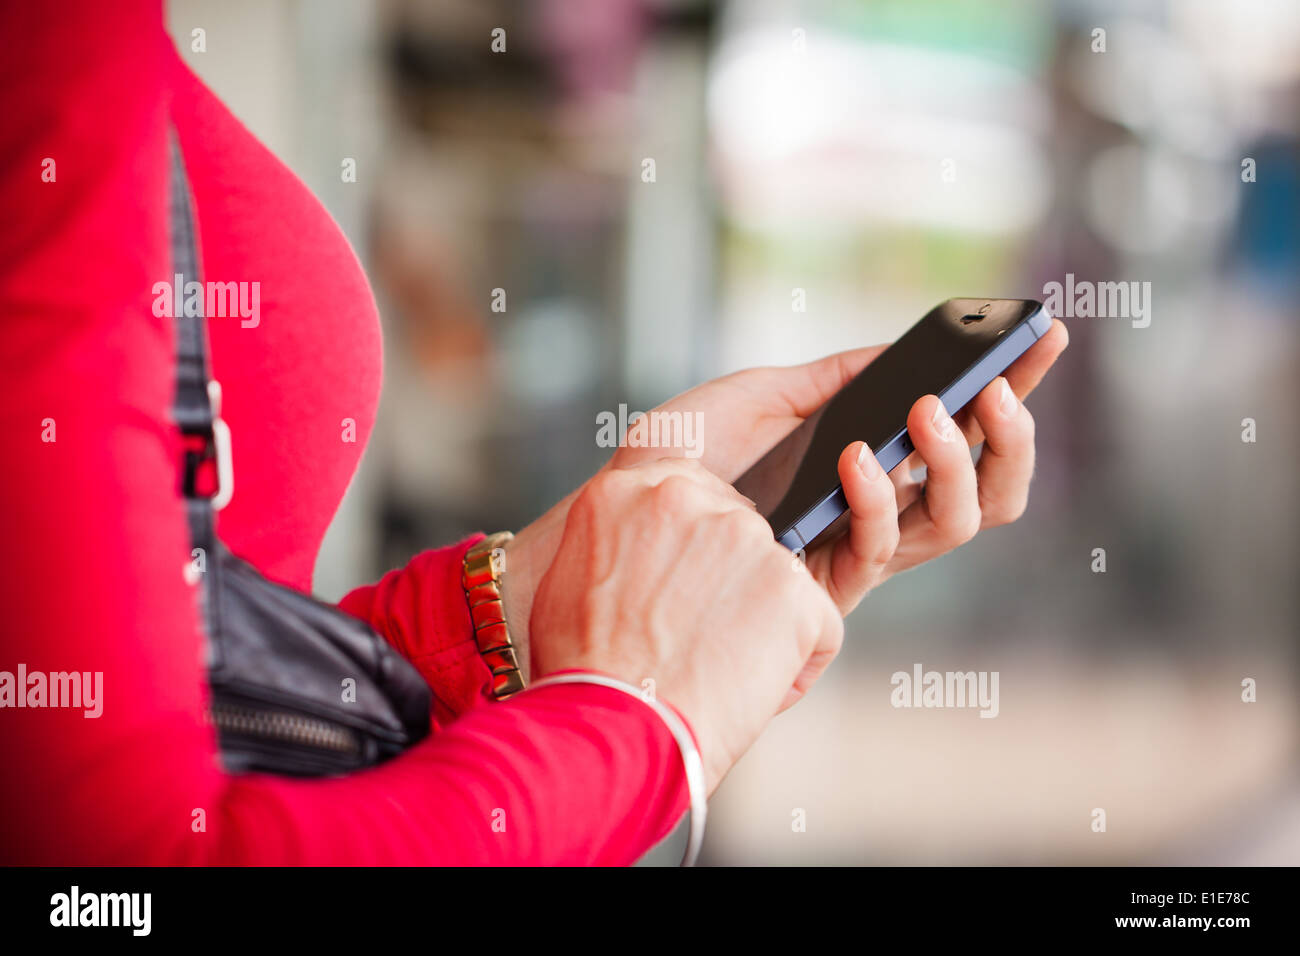 A close-up shot of a woman texting, or using a smartphone cell phone. Stock Photo